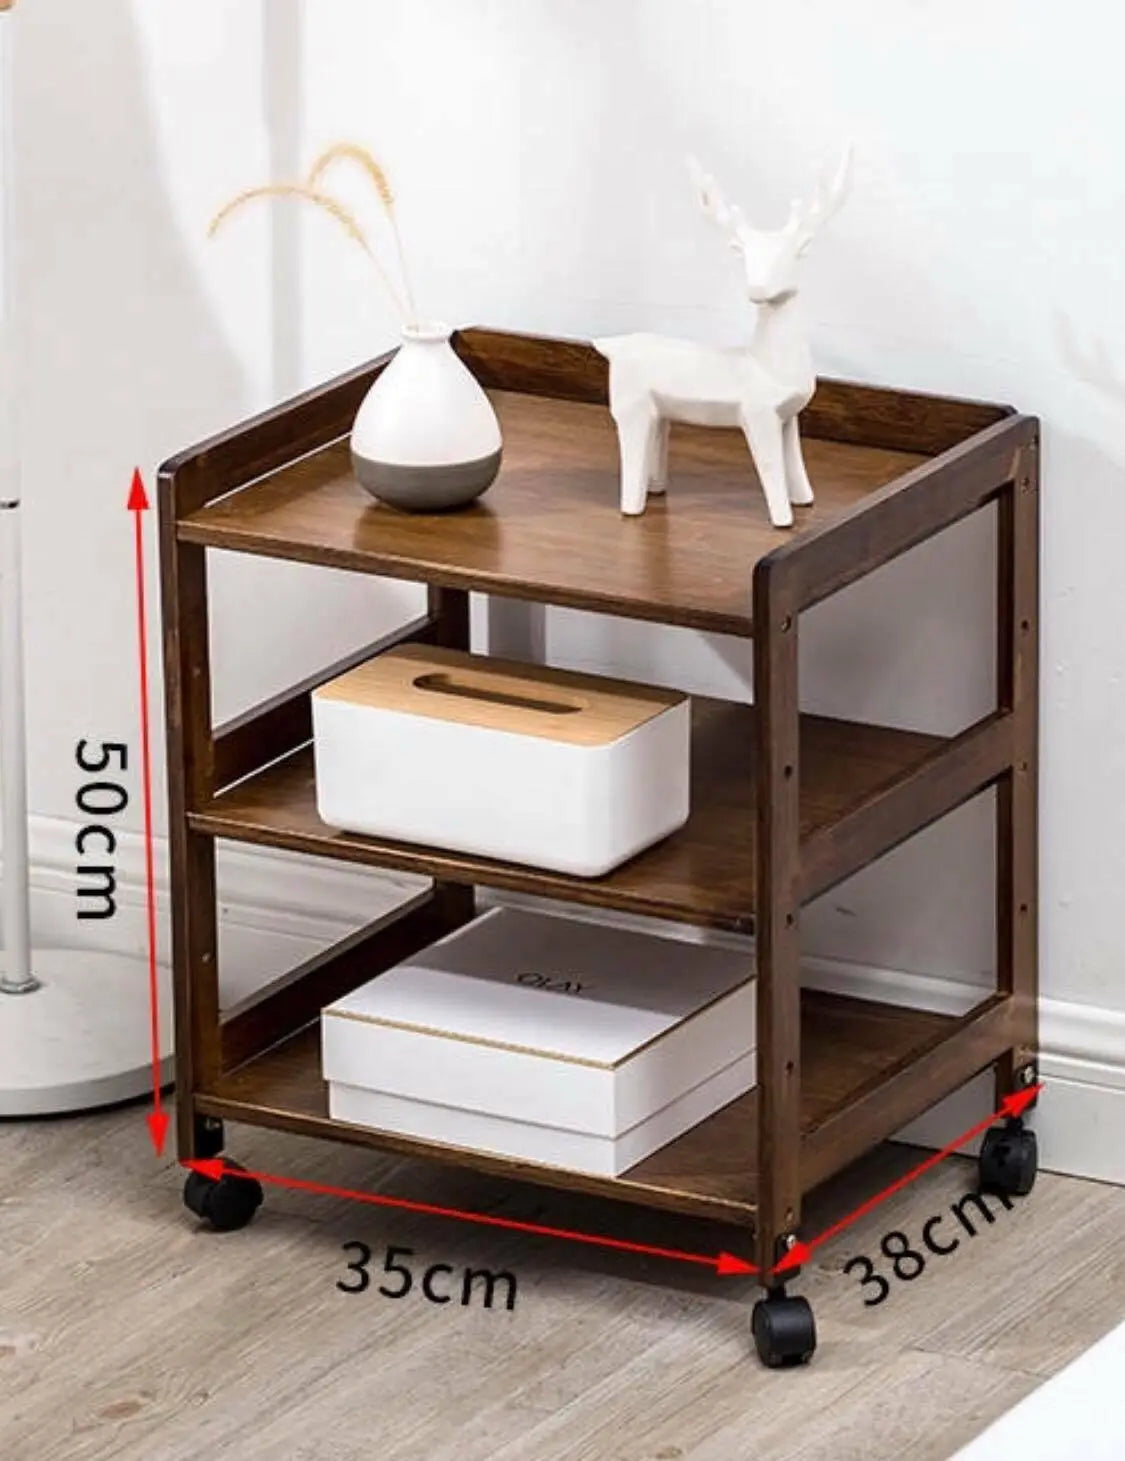 Bamboo Modern Bedside Multiple Shelves Trolley Table With Wheels Cart Rack everythingbamboo